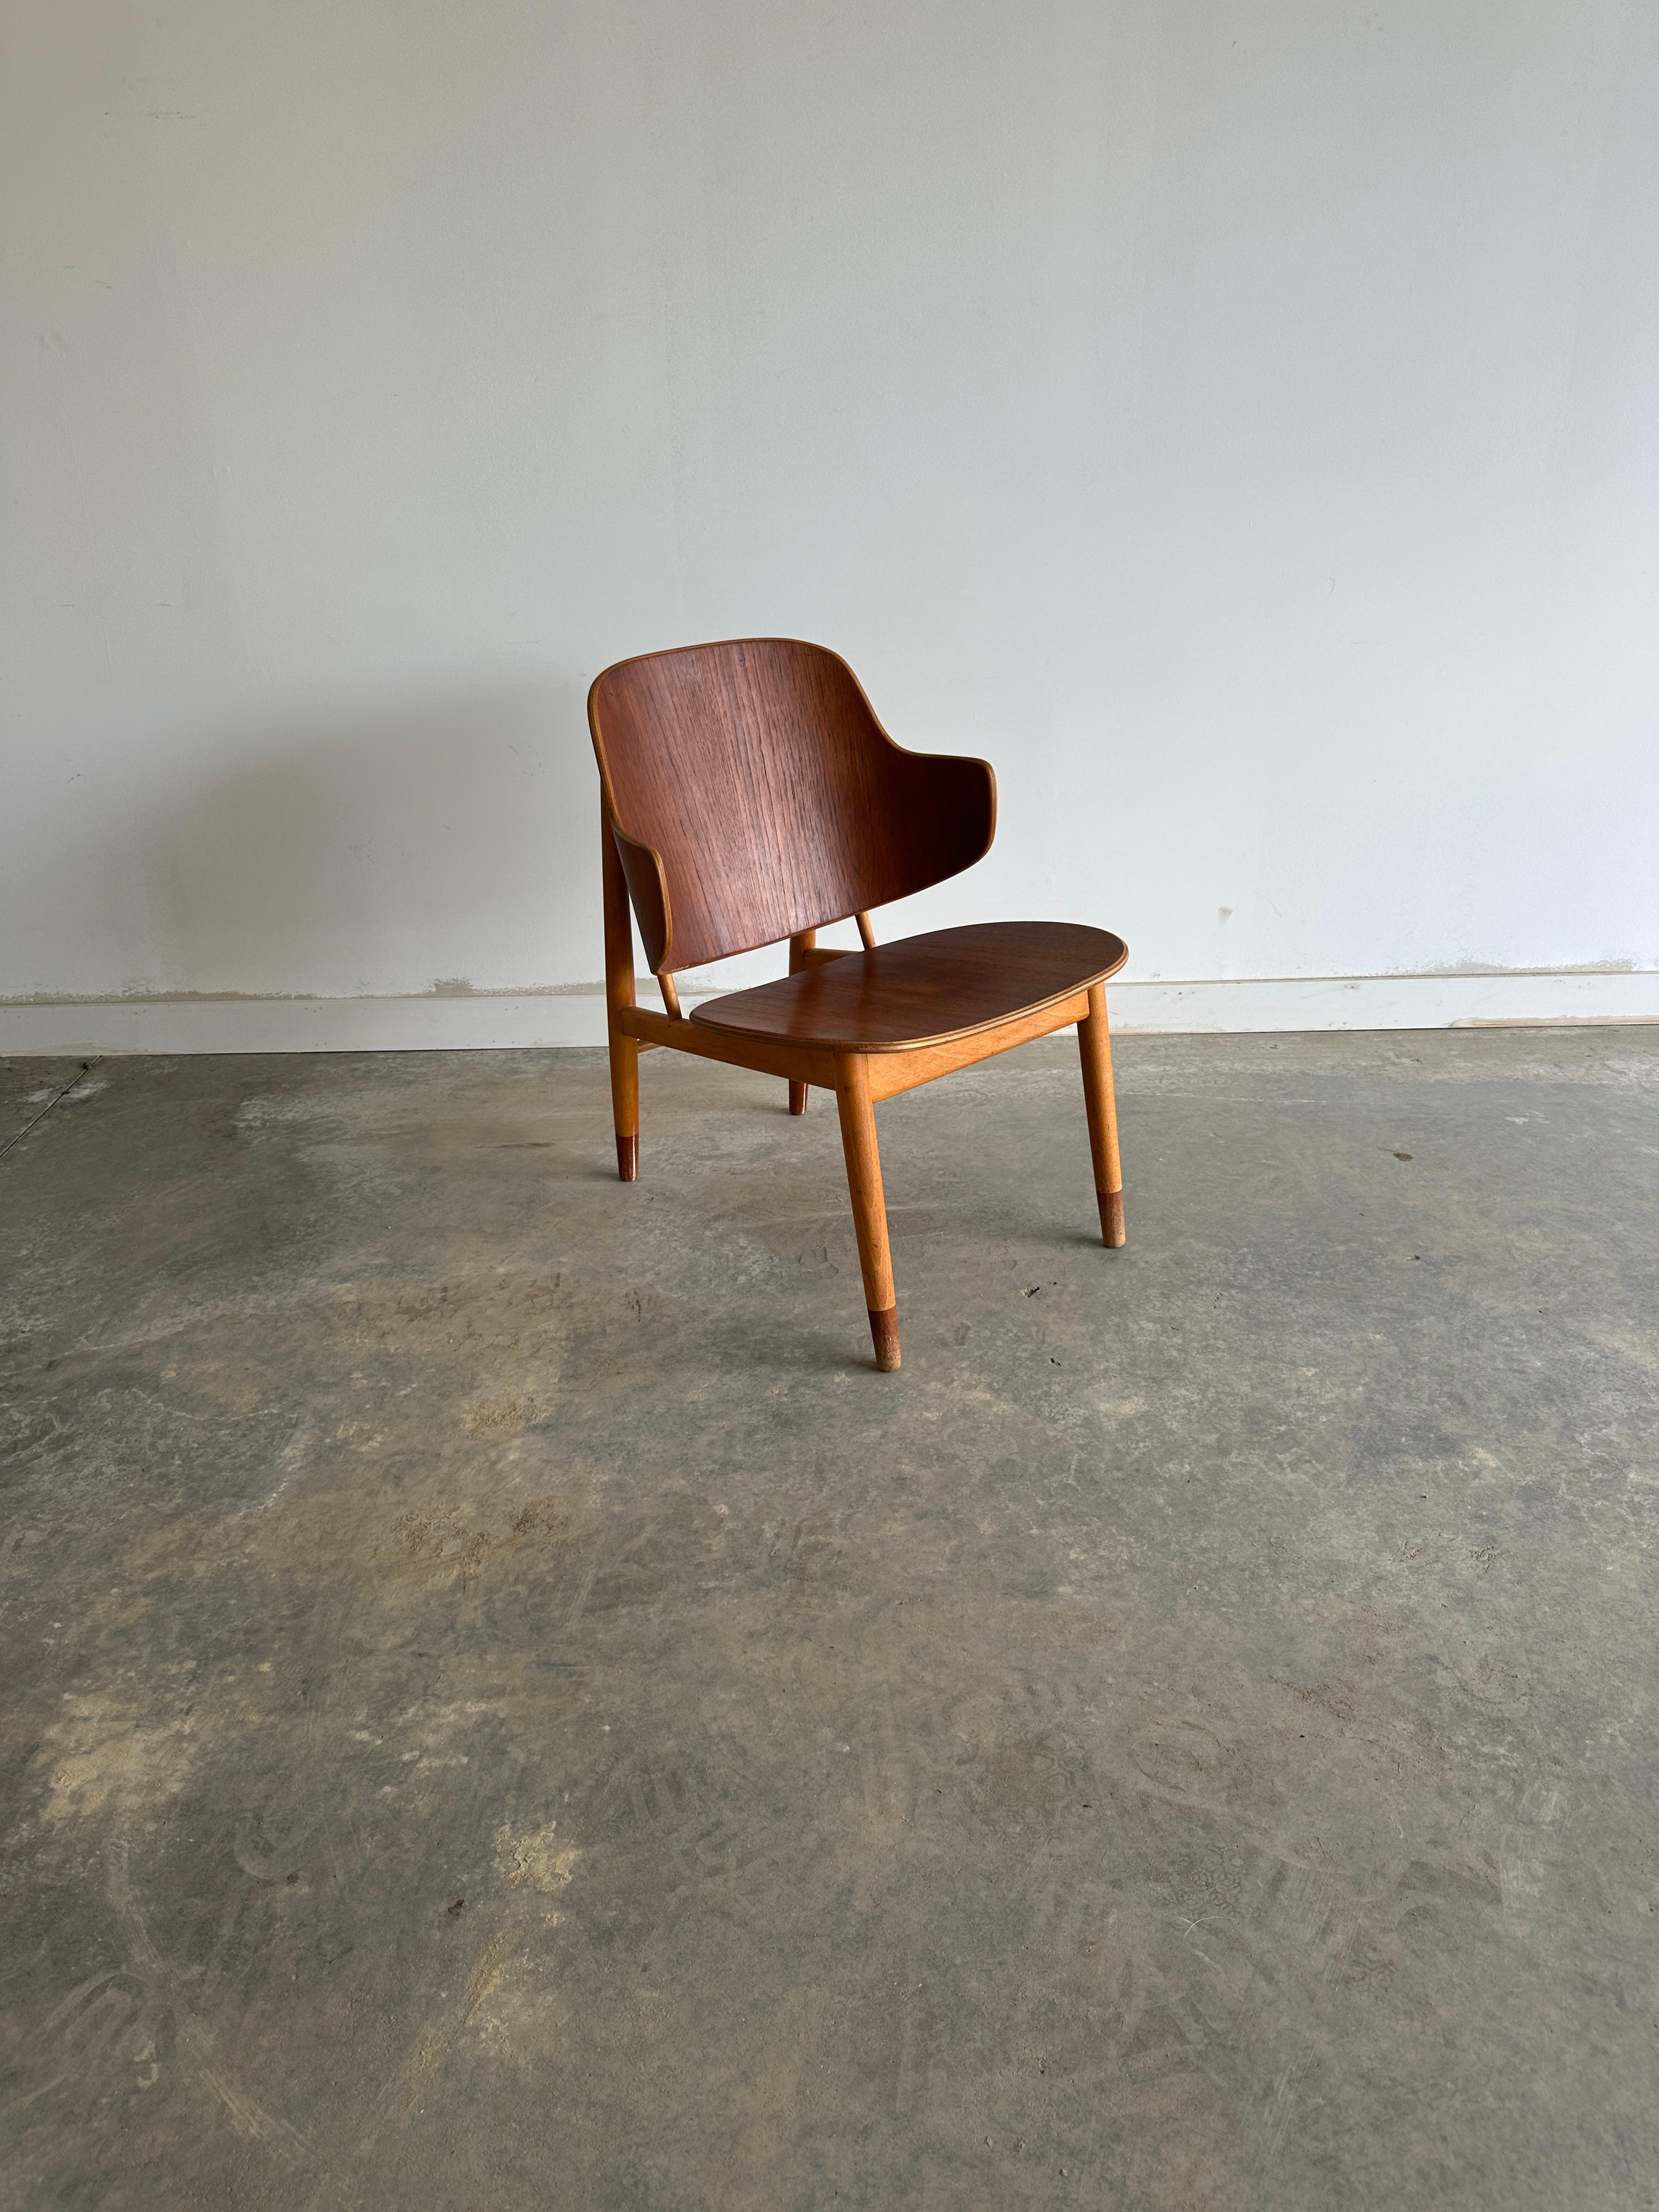 This chair is a rare and original example of one of the most iconic designs by the Danish architect and furniture maker Ib Kofod-Larsen, who was known for his elegant and comfortable seating.

The Penguin chair was introduced in 1953 and became a